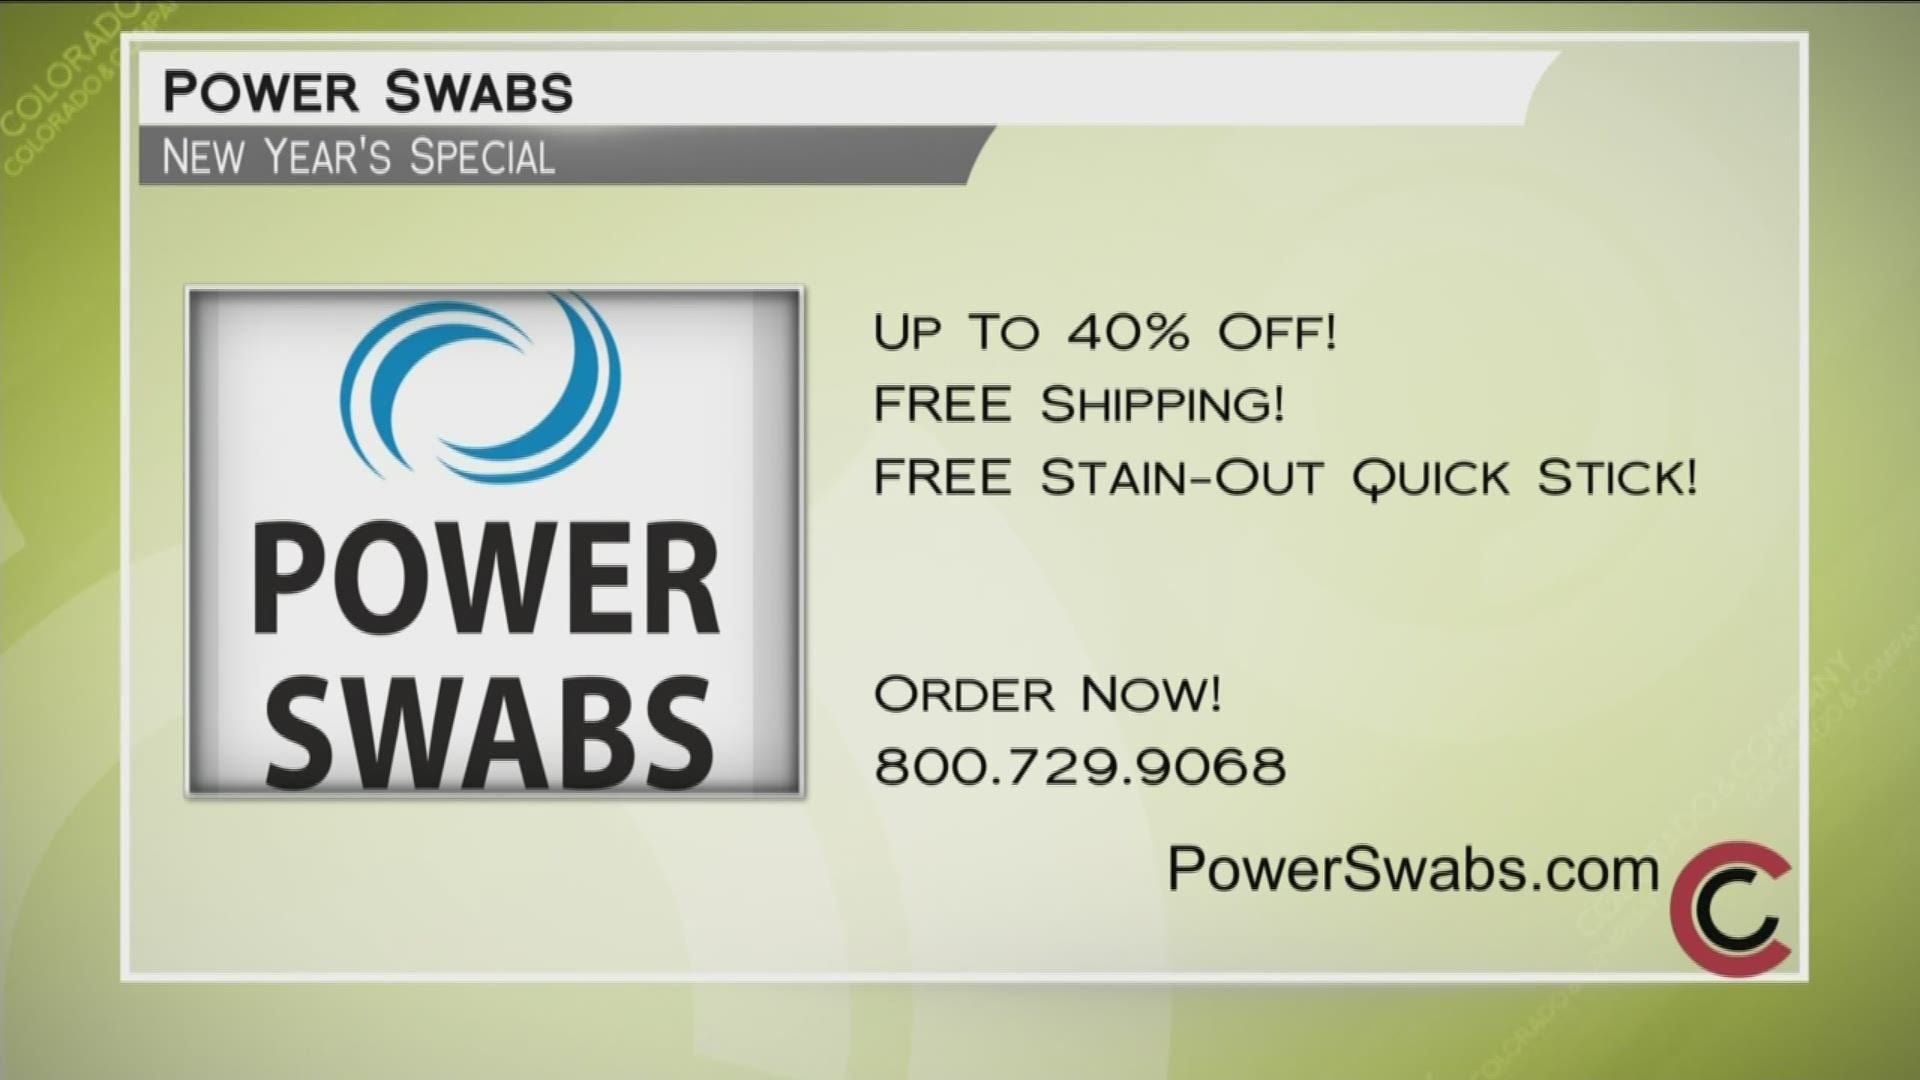 Call 800.729.9068 to order Power Swabs today. You'll get 40% off, plus a free Quick Stick and free shipping. Learn more at PowerSwabs.com.